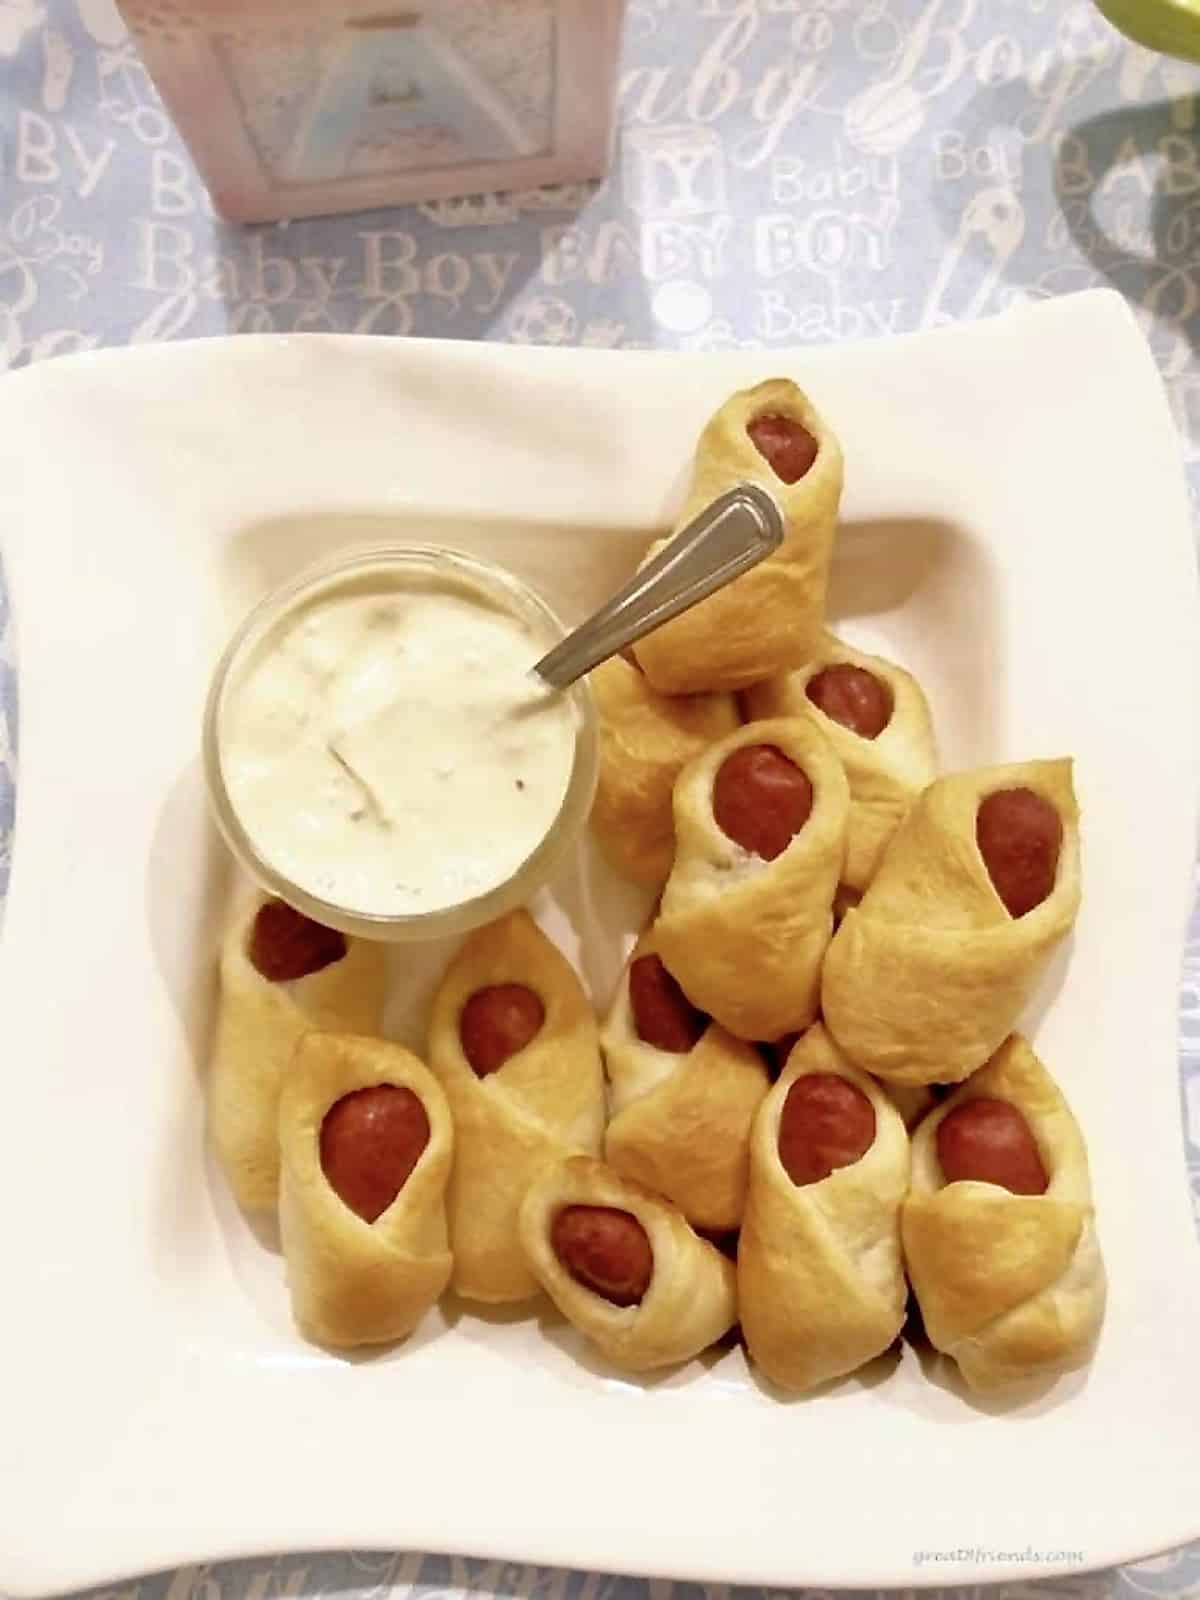 Small beef wieners wrapped in a pastry and served with a sauce on the side.